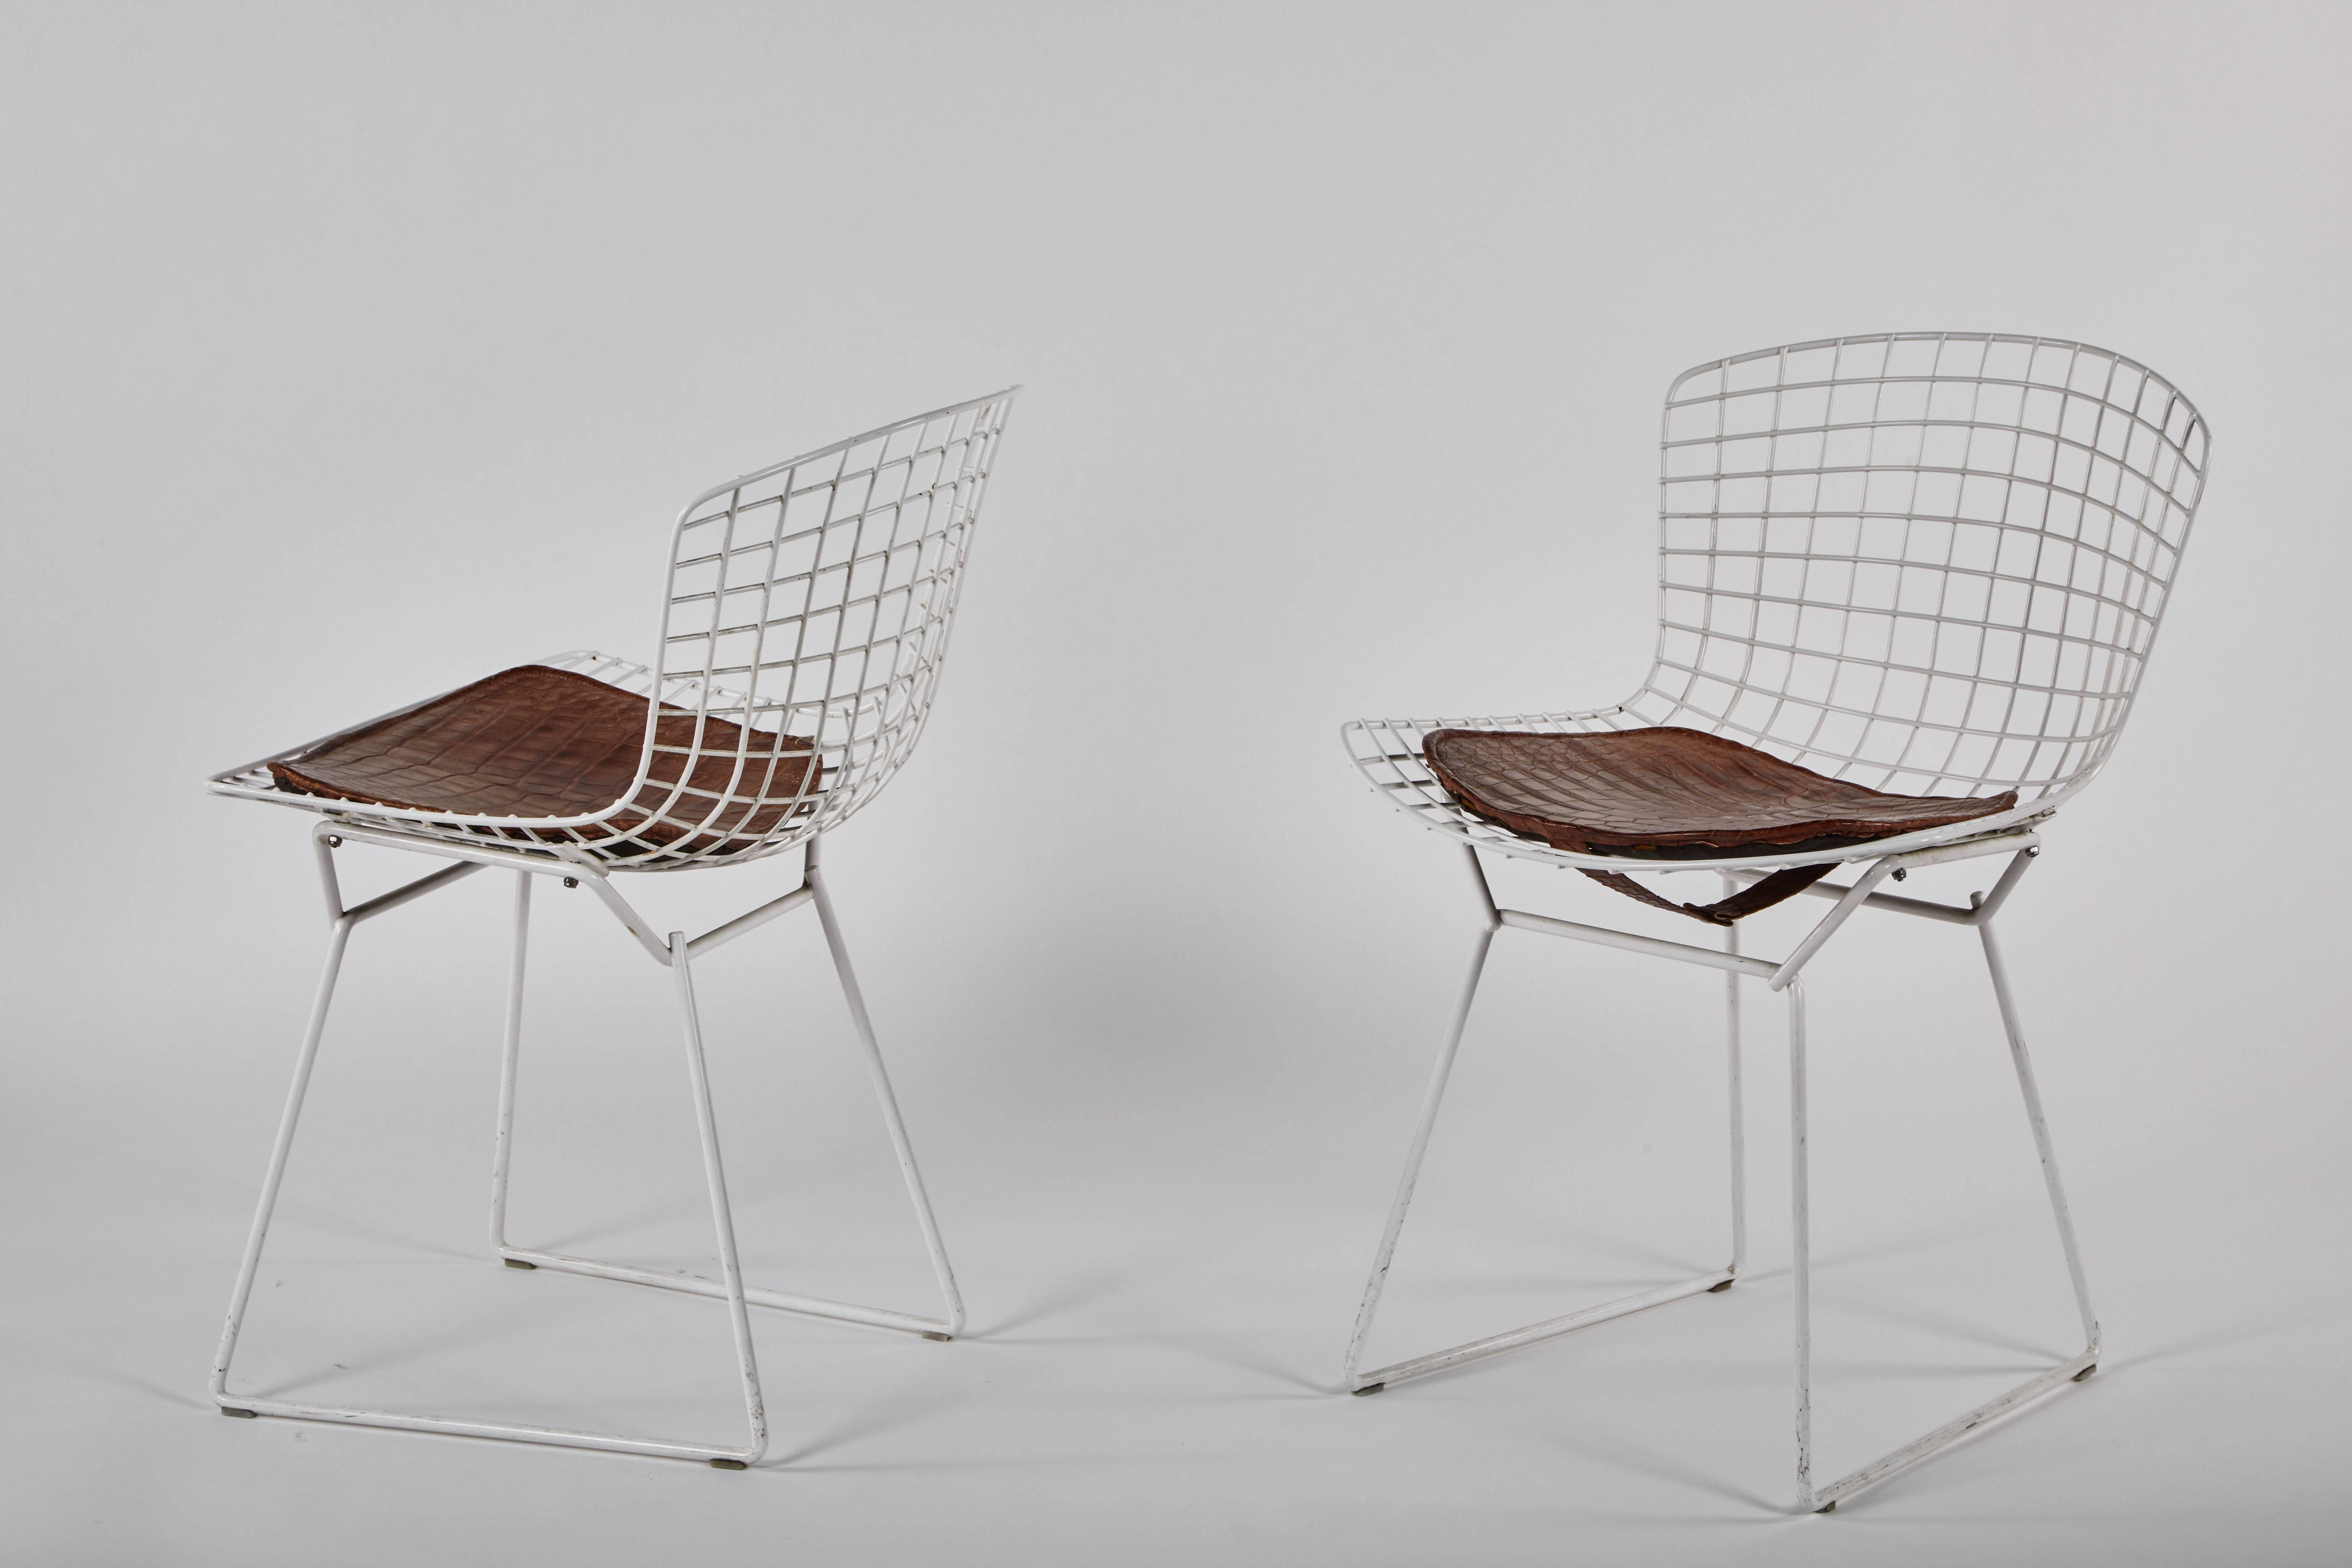 Midcentury white powder-coated steel side chairs by Bertoia, with alligator cushions.